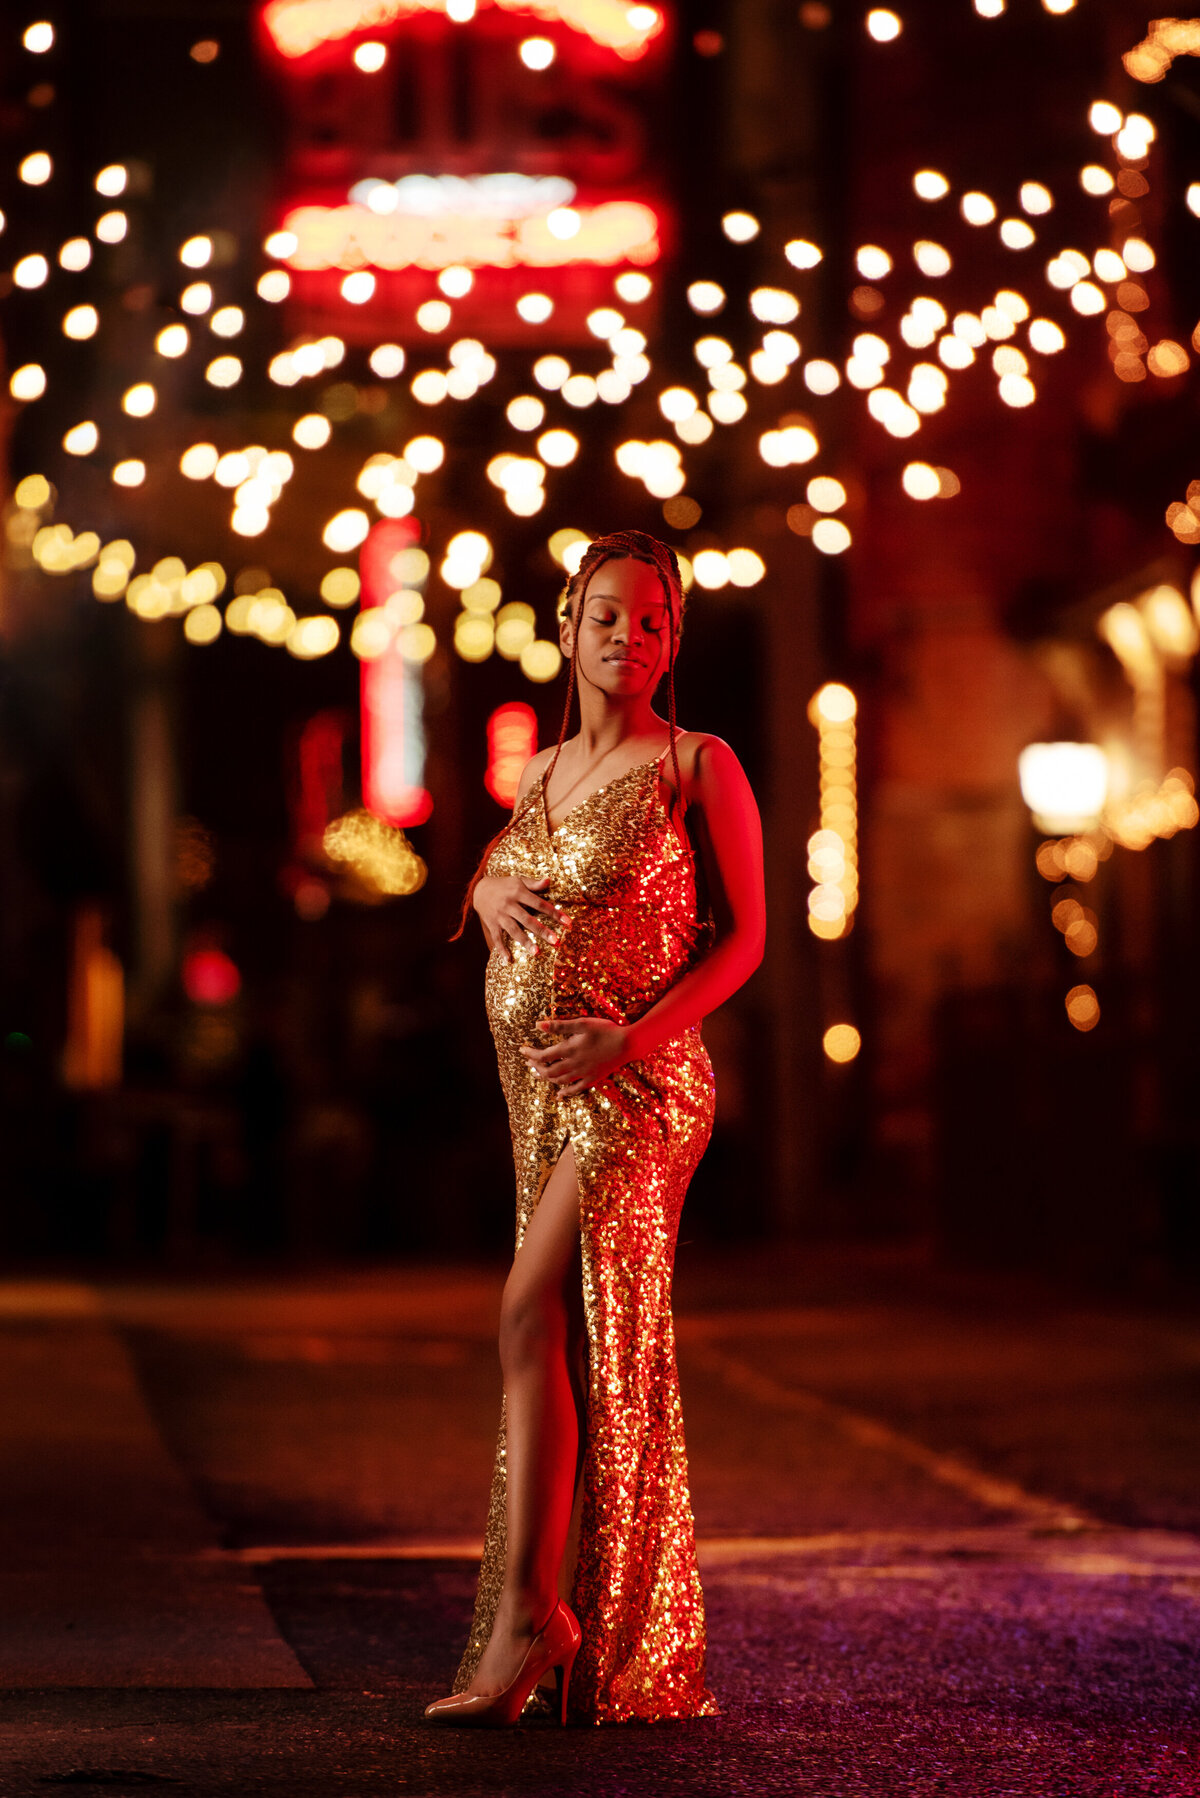 st-louis-maternity-photographer-pregnant-mom-in-gold-sequin-gown-on-nashville-at-night-with-neon-lights